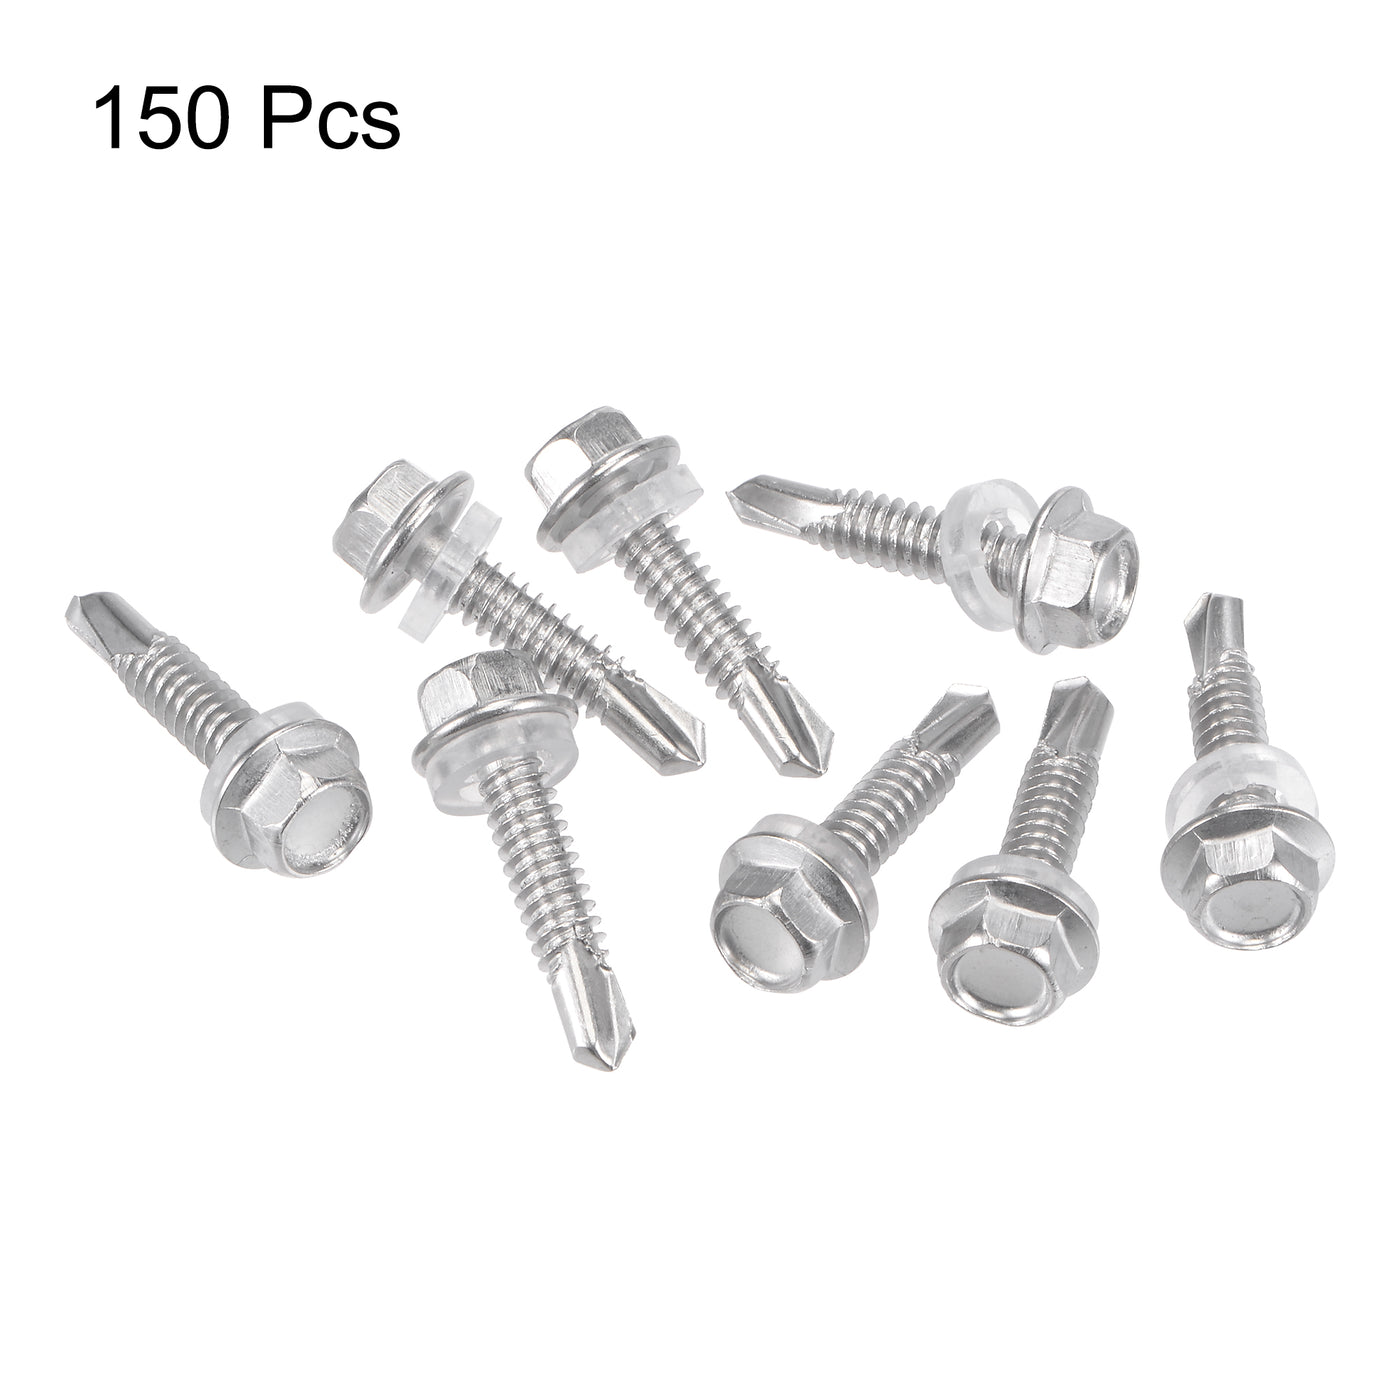 uxcell Uxcell #12 x 63/64" 410 Stainless Steel Hex Washer Head Self Drilling Screws 150pcs